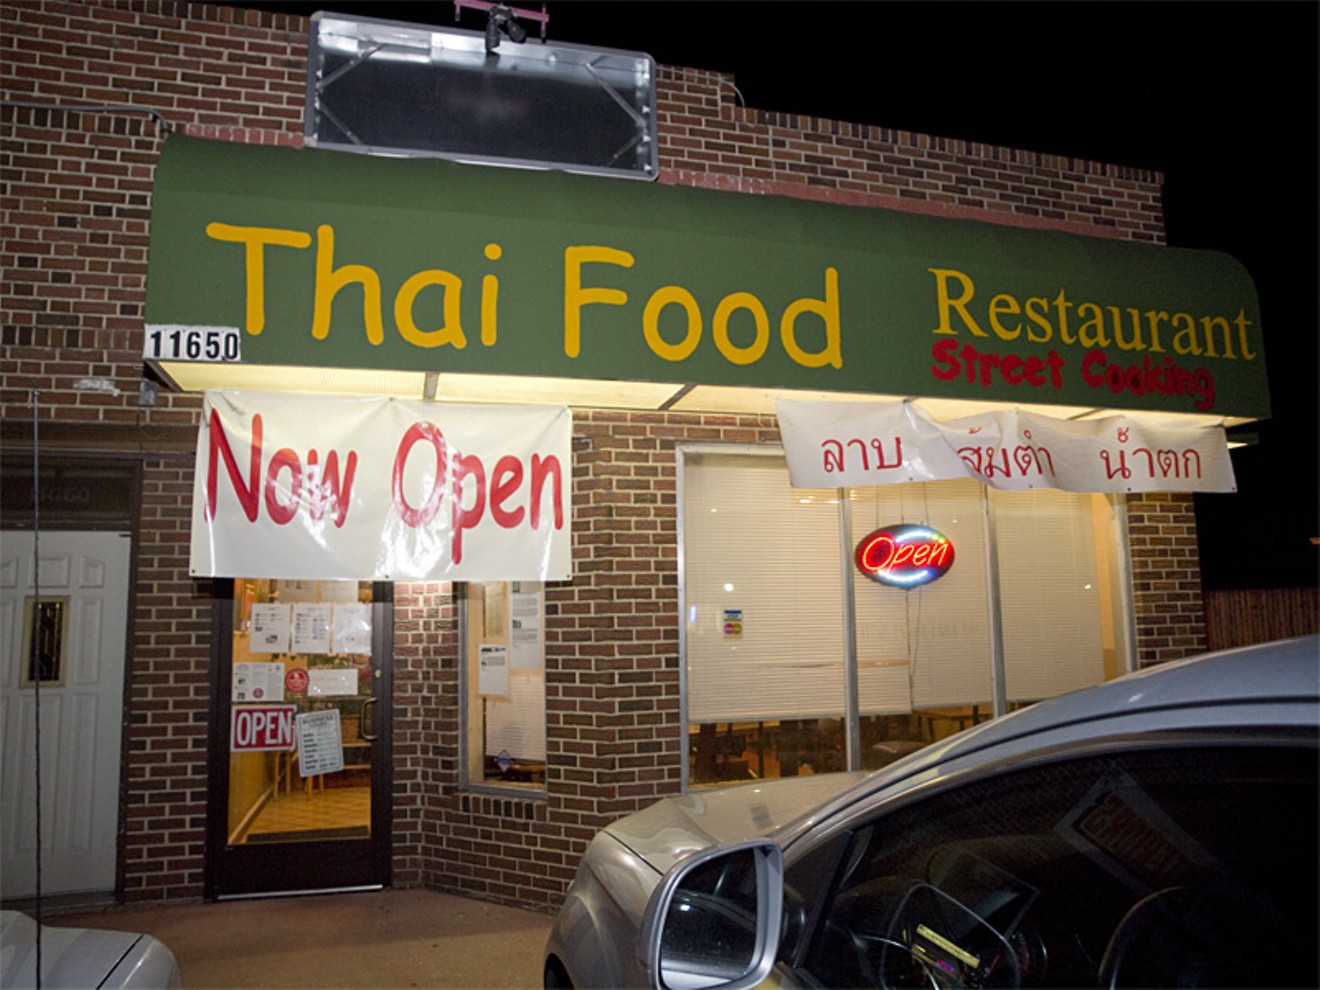 Thai Street Food opened at 11650 Montview Boulevard in 2011 but is now closed.